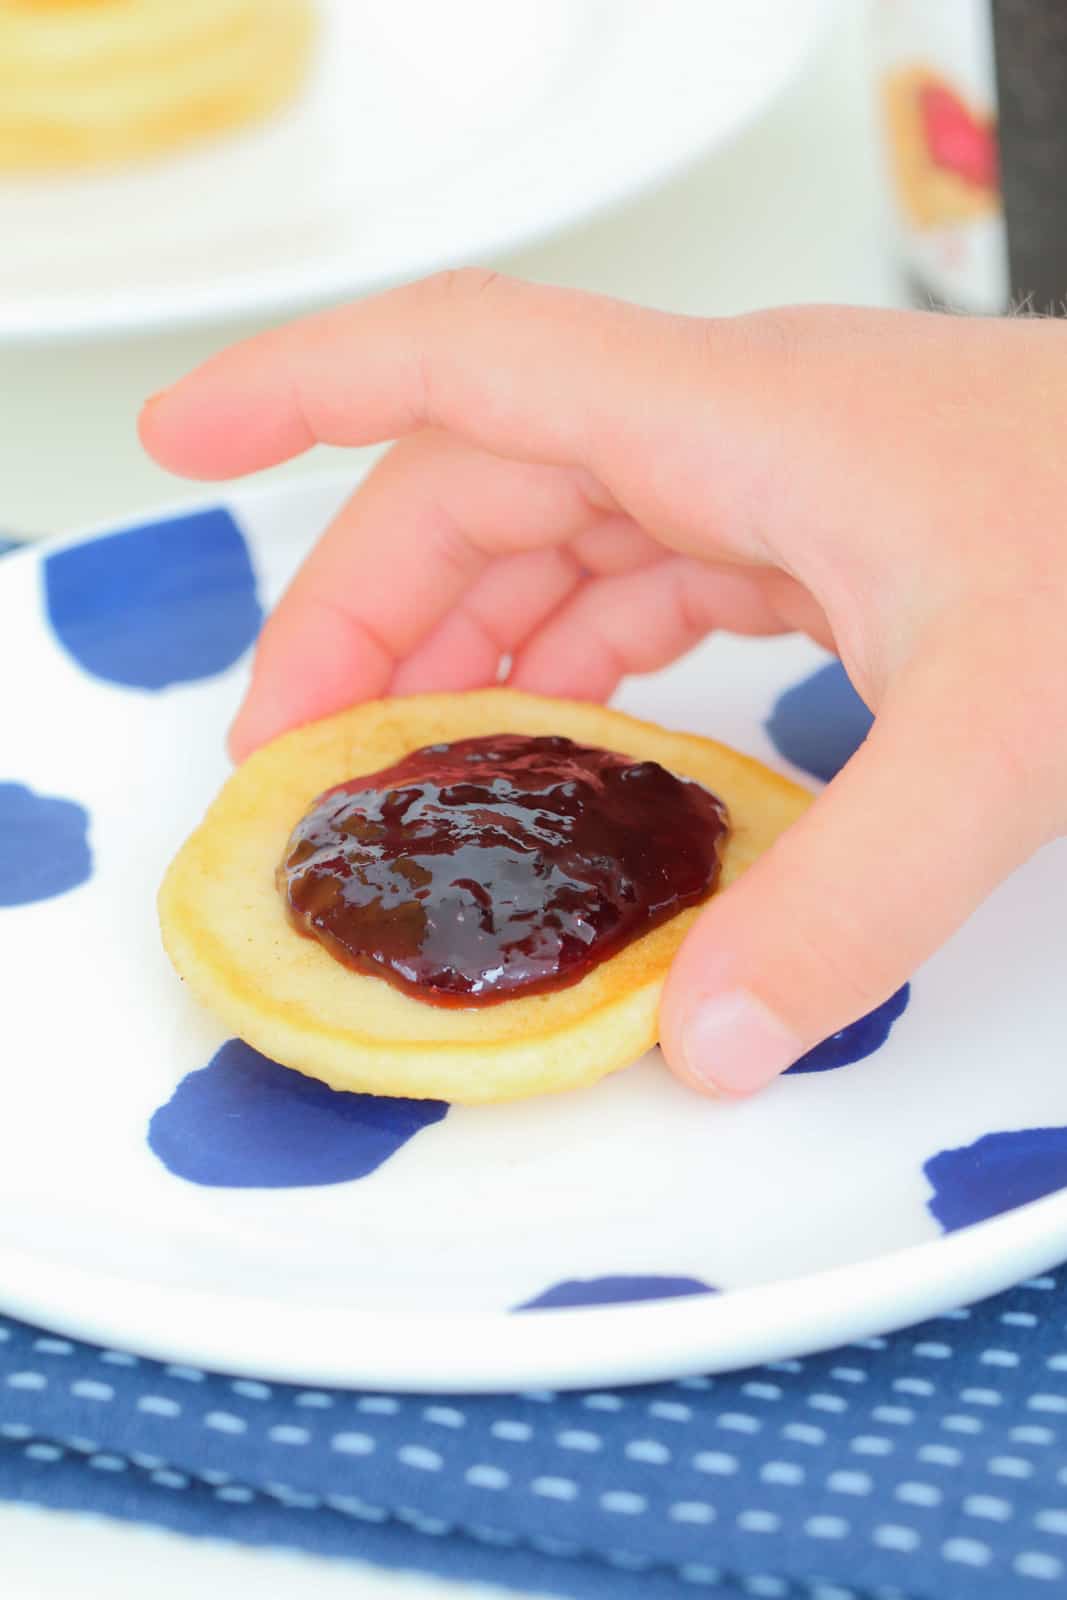 A child's hand holding a pikelet topped with jam.